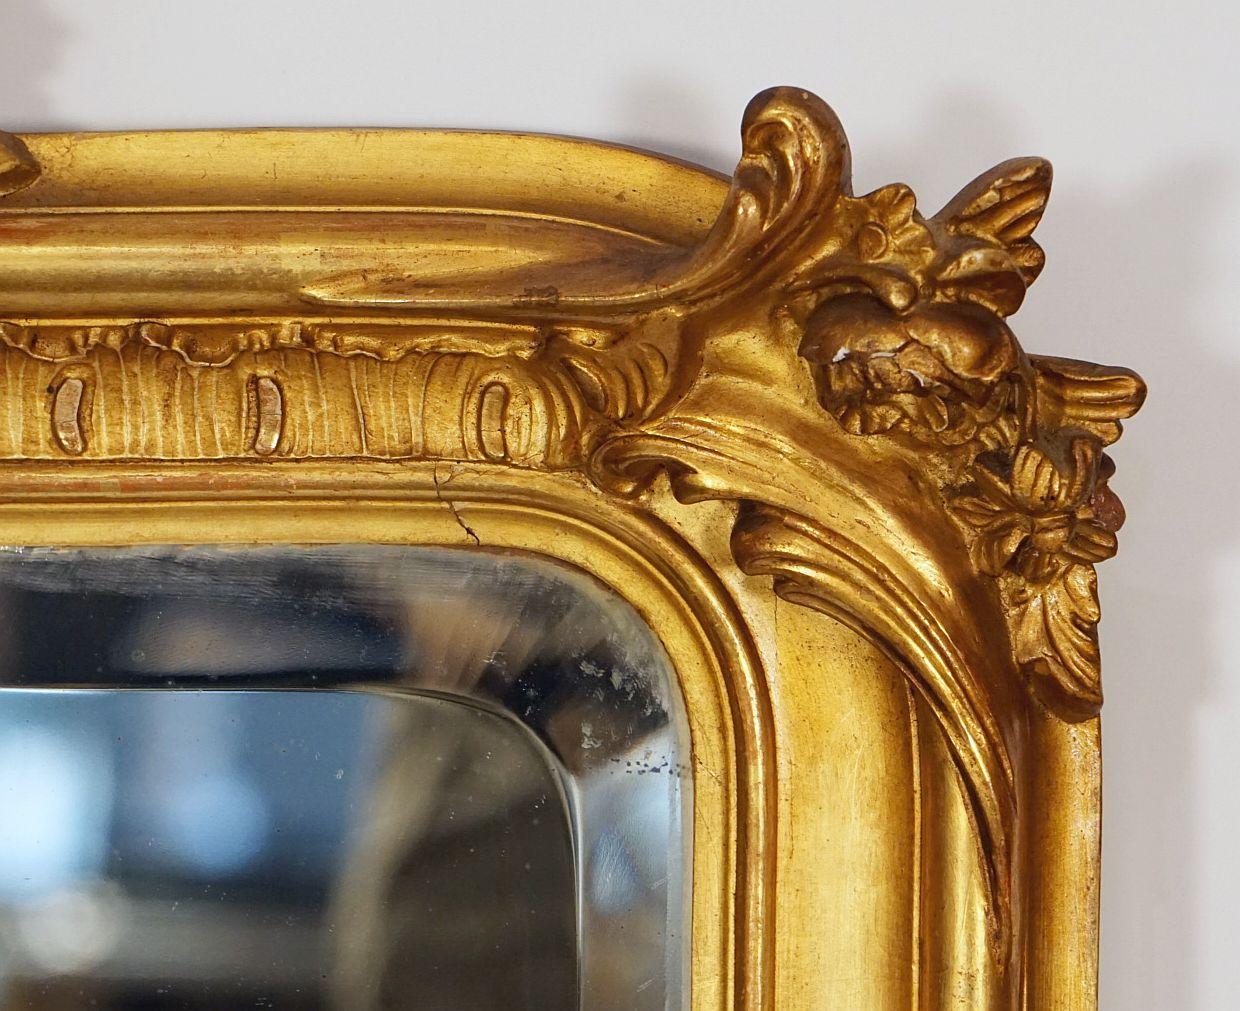 Large French Gilt Pier Mirror from the 19th Century (H 56 x W 37) For Sale 12